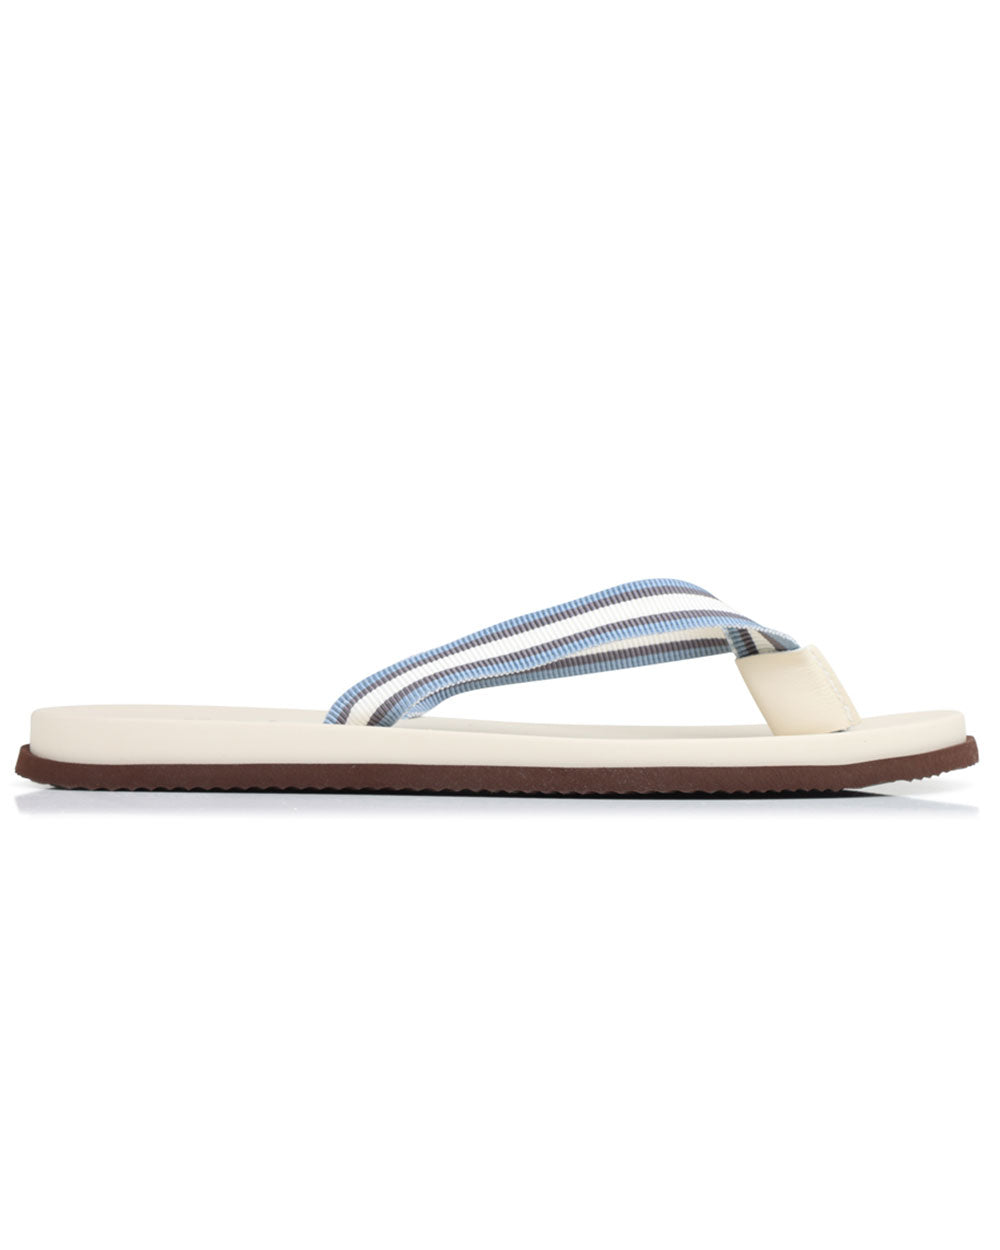 Flip Flop Sandal in White and Blue